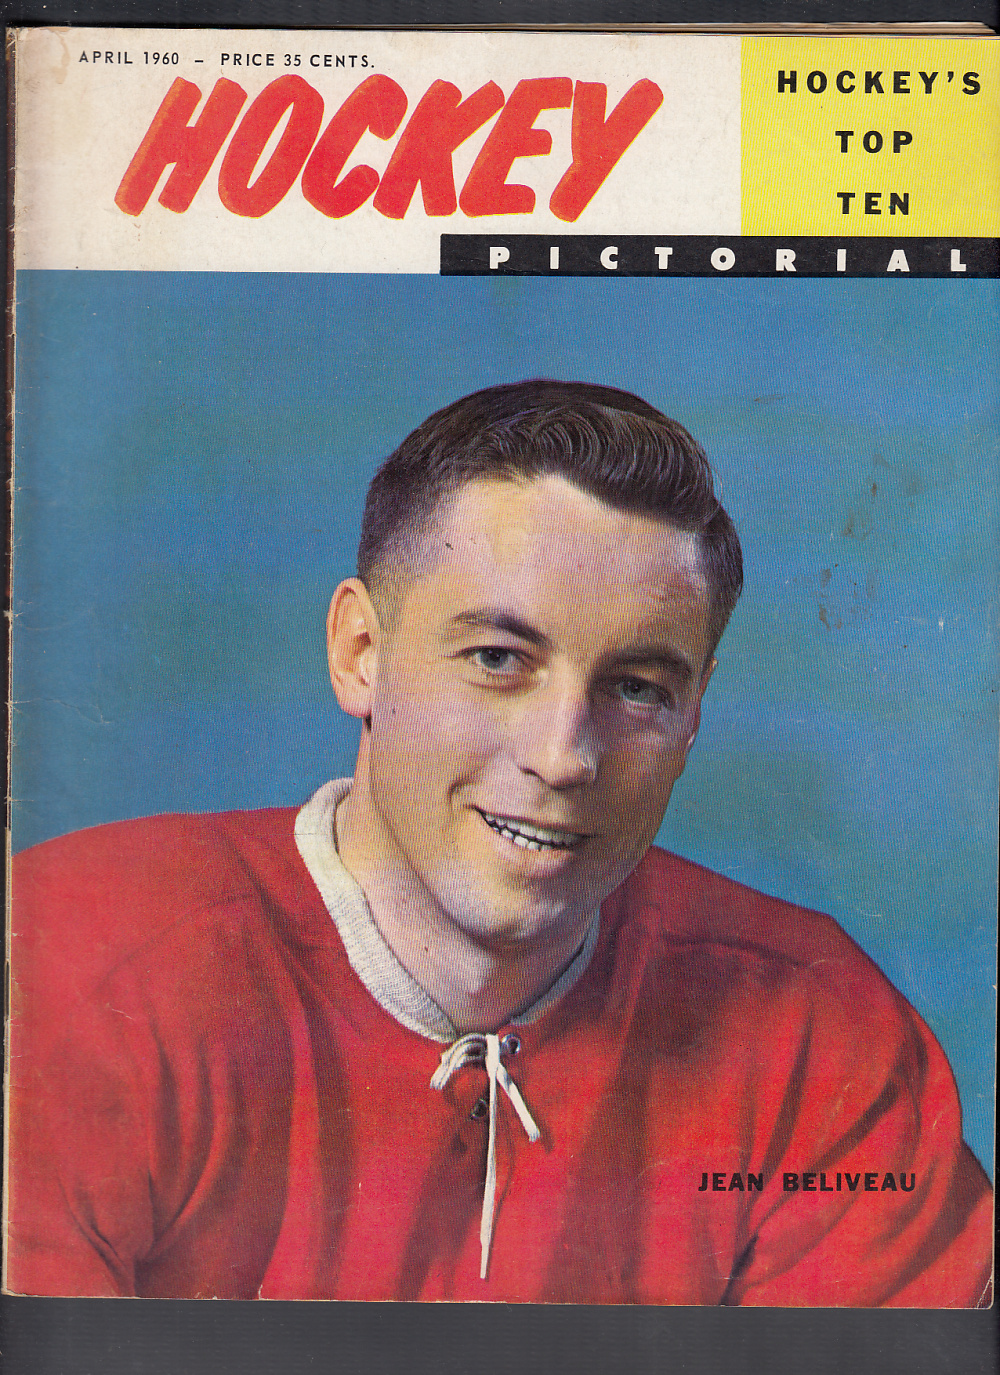 1960 HOCKEY PICTORIAL MAGAZINE J. BELIVEAU ON COVER photo